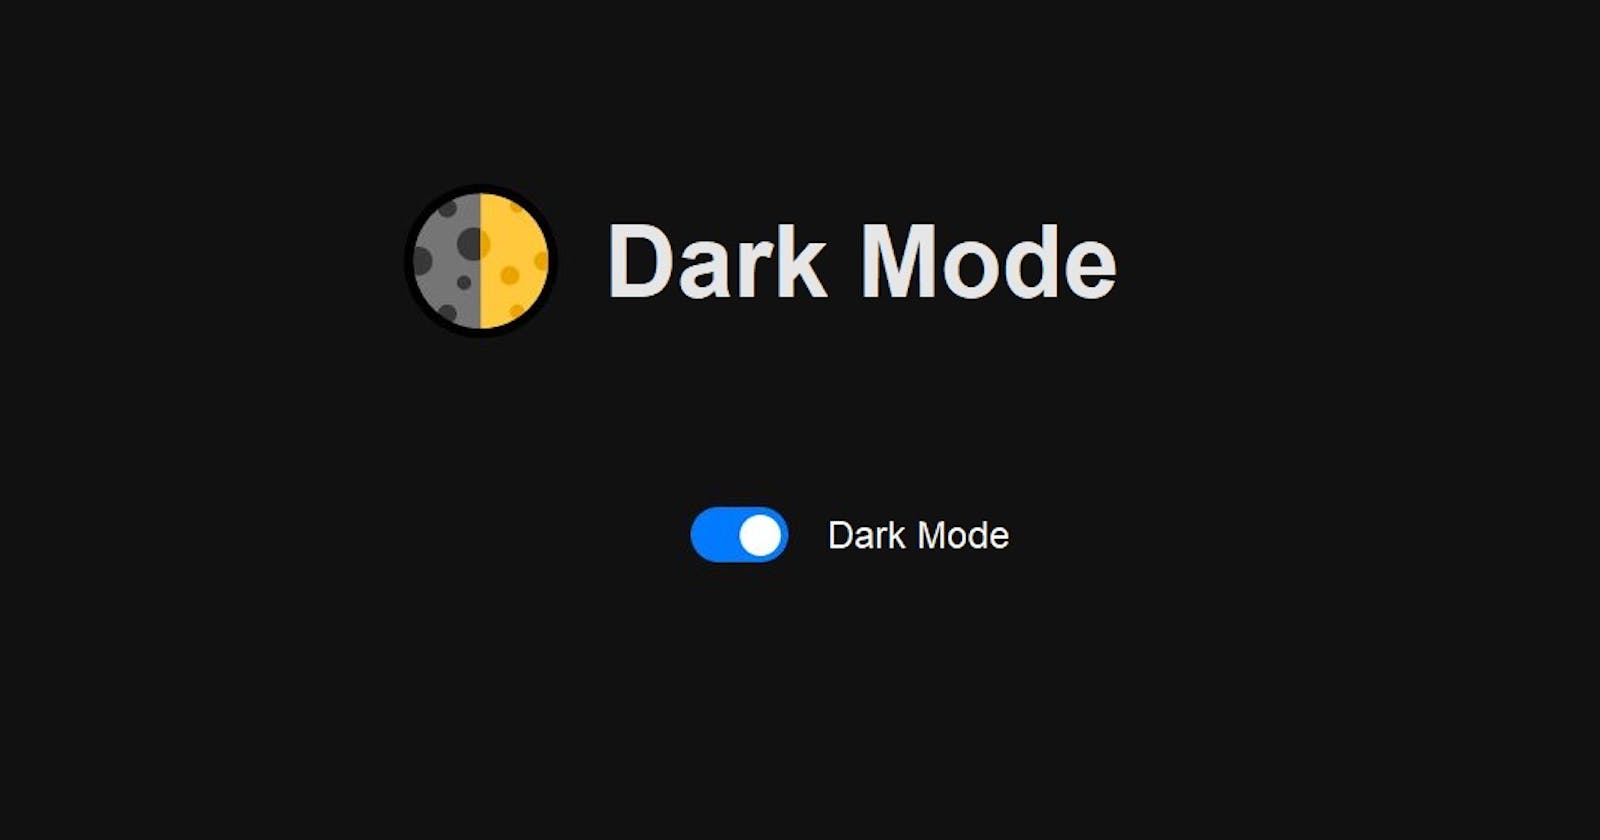 Add Dark Mode to your site